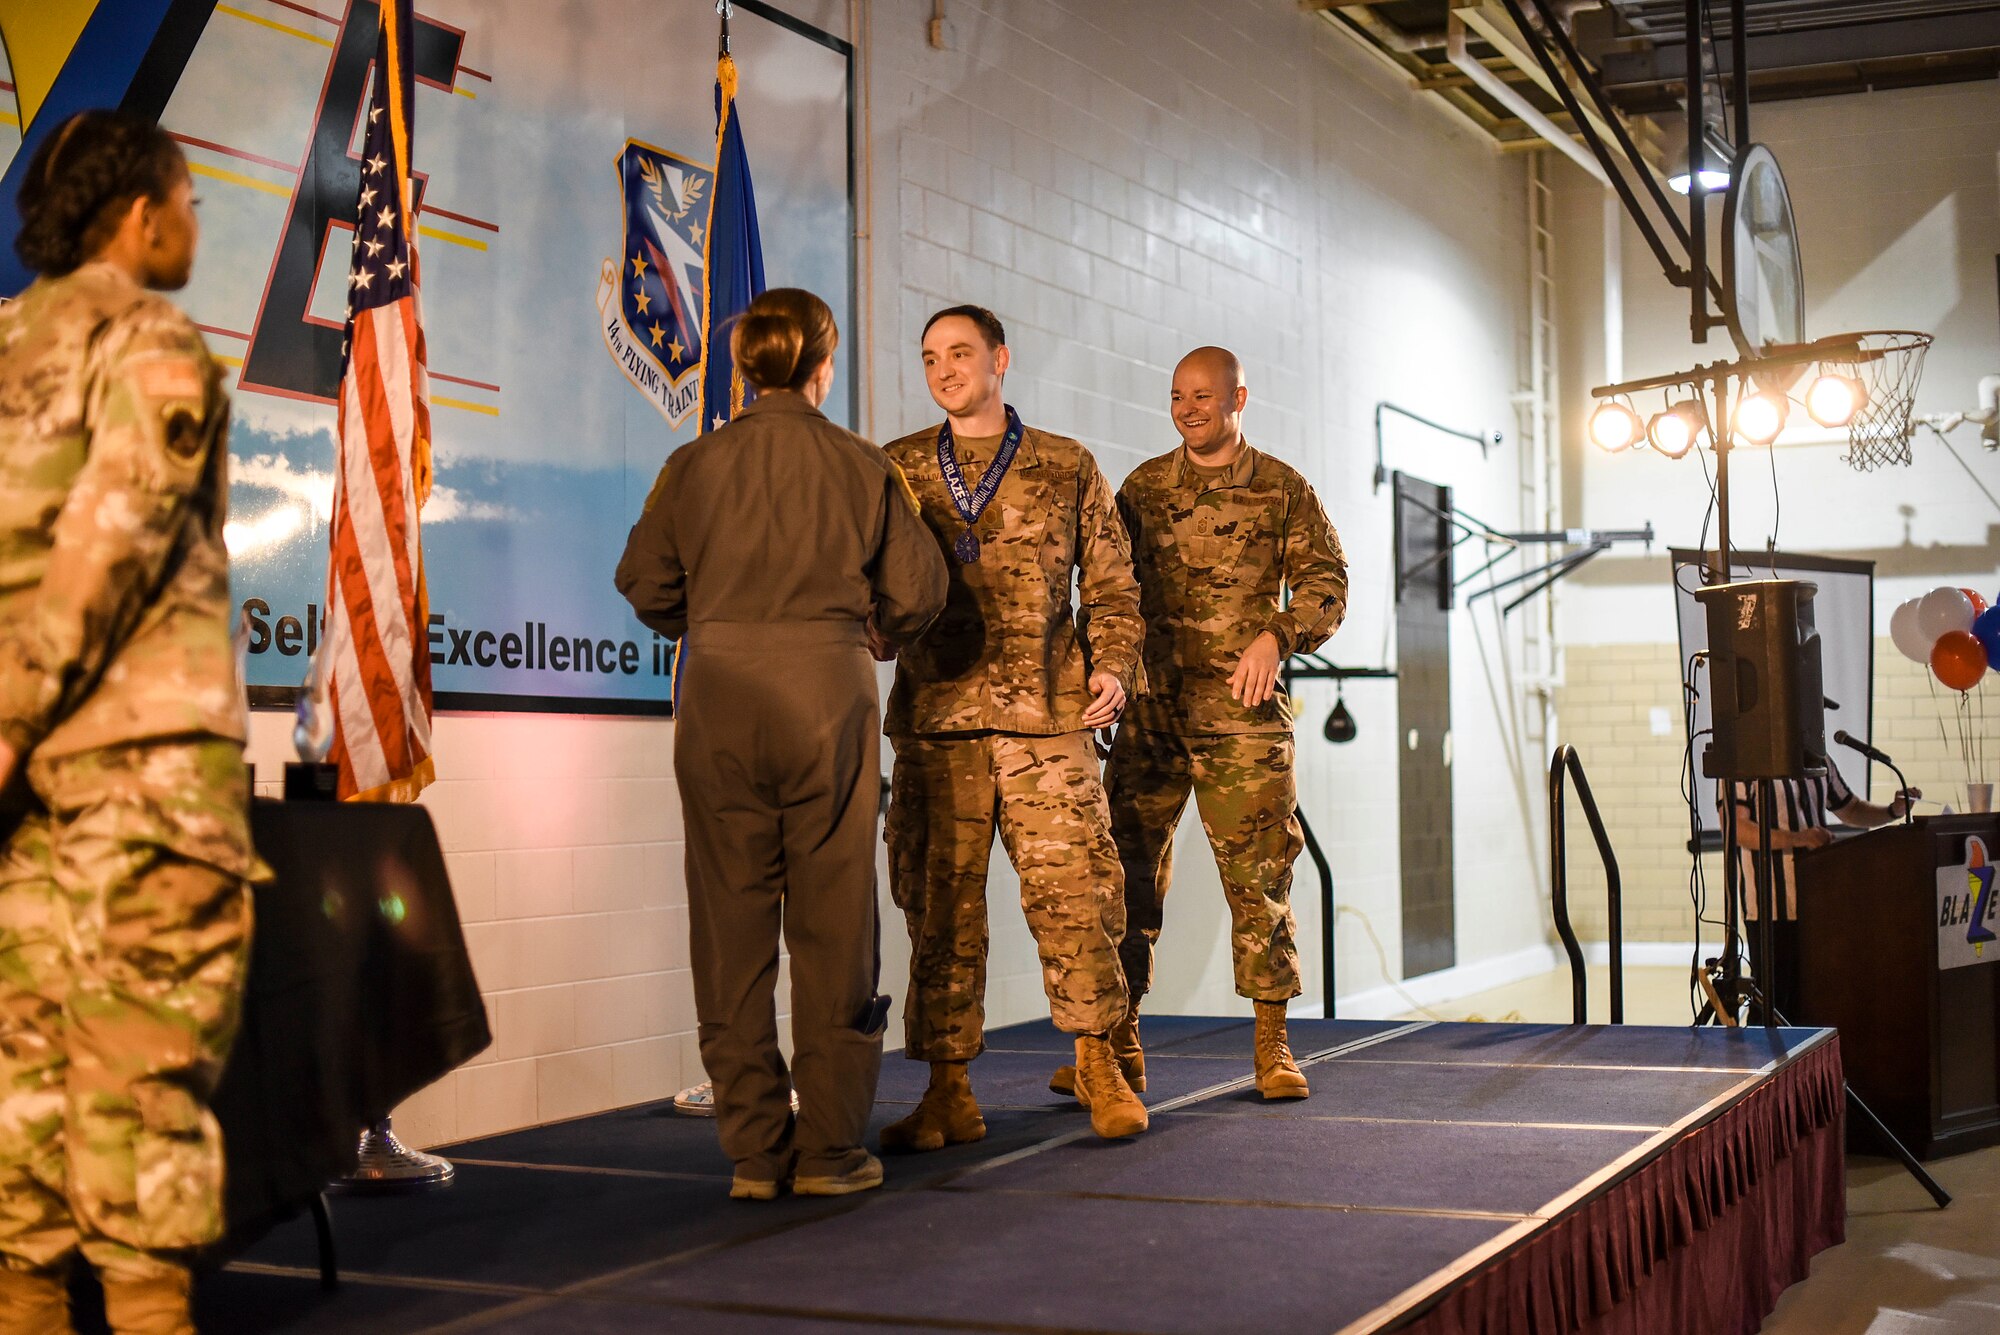 Col. Samantha Weeks, 14th Flying Training Wing commander, and Chief Master Sgt. Trevor James, 14th FTW command chief, congratulate Master Sgt. Nathan Sullivan, 14th Operations Group first sergeant, after winning the First Sergeant of the Year award Feb. 9, 2020, on Columbus Air Force Base, Miss. Every nominee was presented a medal before the ceremony and every winner was presented with an official trophy during the ceremony. (U.S. Air Force photo by Senior Airman Keith Holcomb)